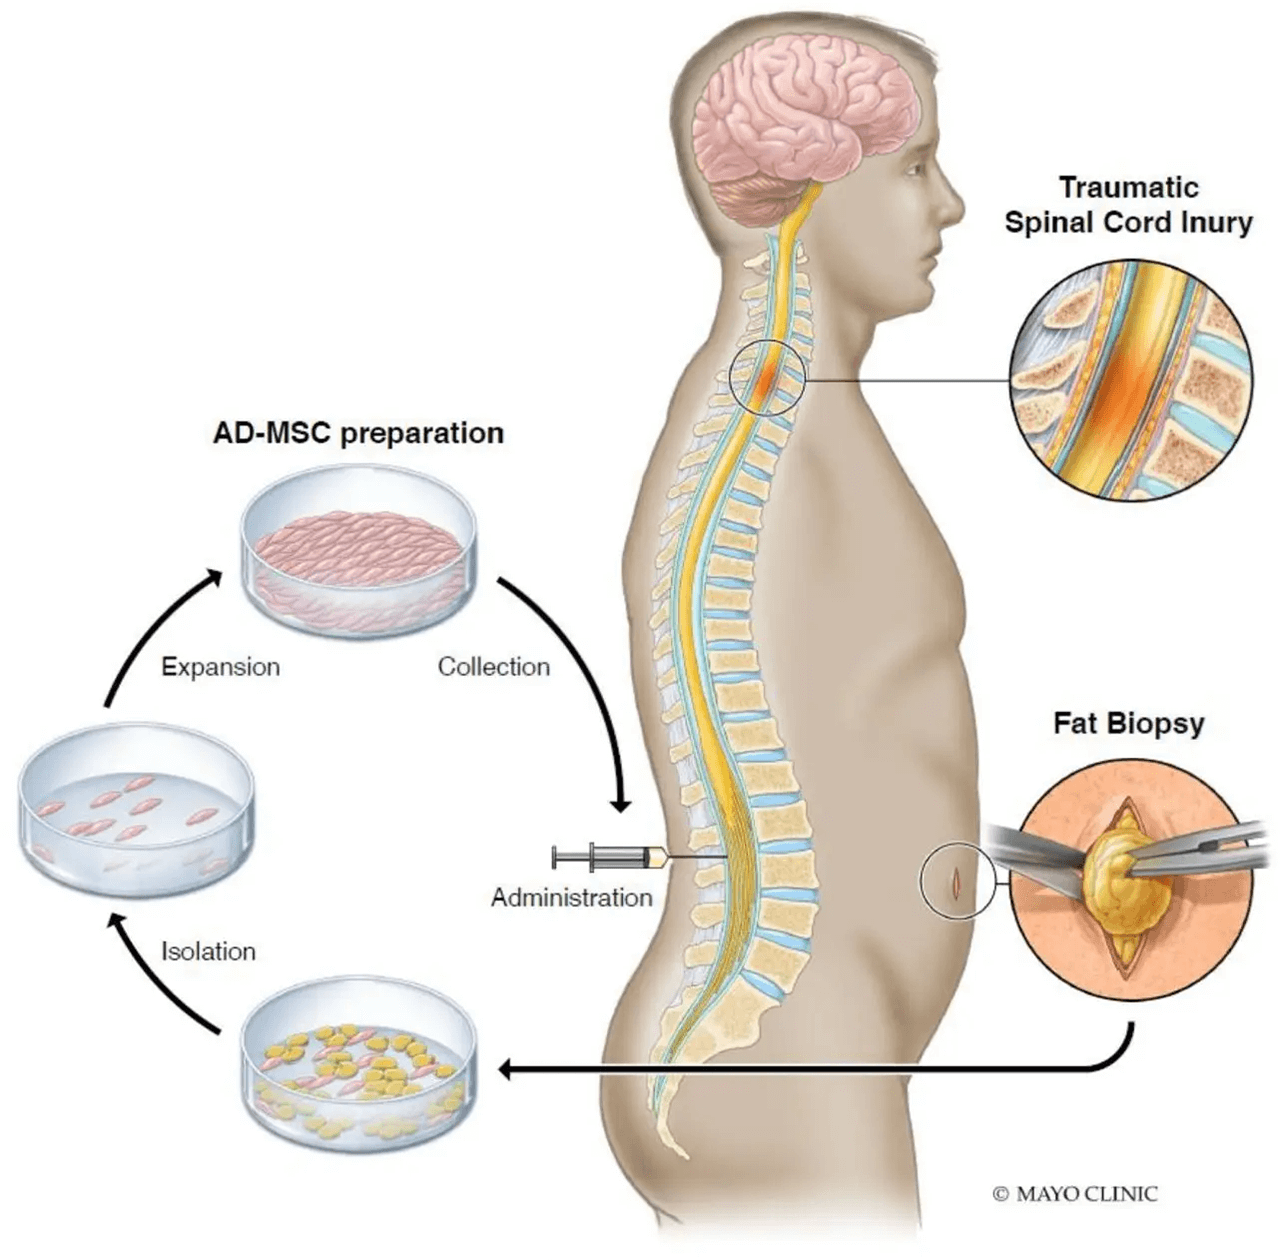 Spinal cord injury stem cell therapy